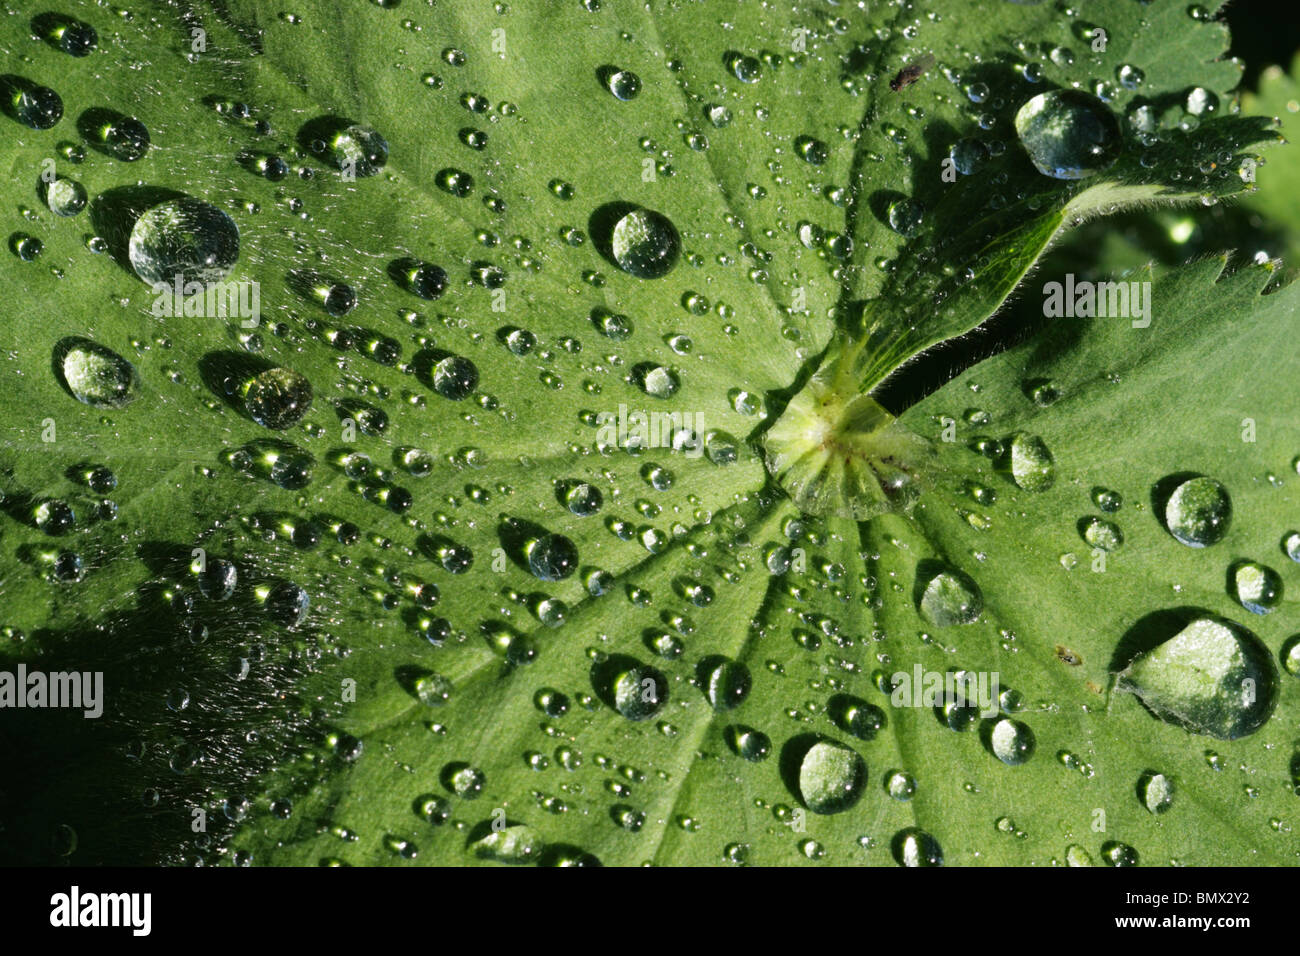 Lady's mantle (Alchemilla filicaulis) leaf covered with dew drops against a black background Stock Photo